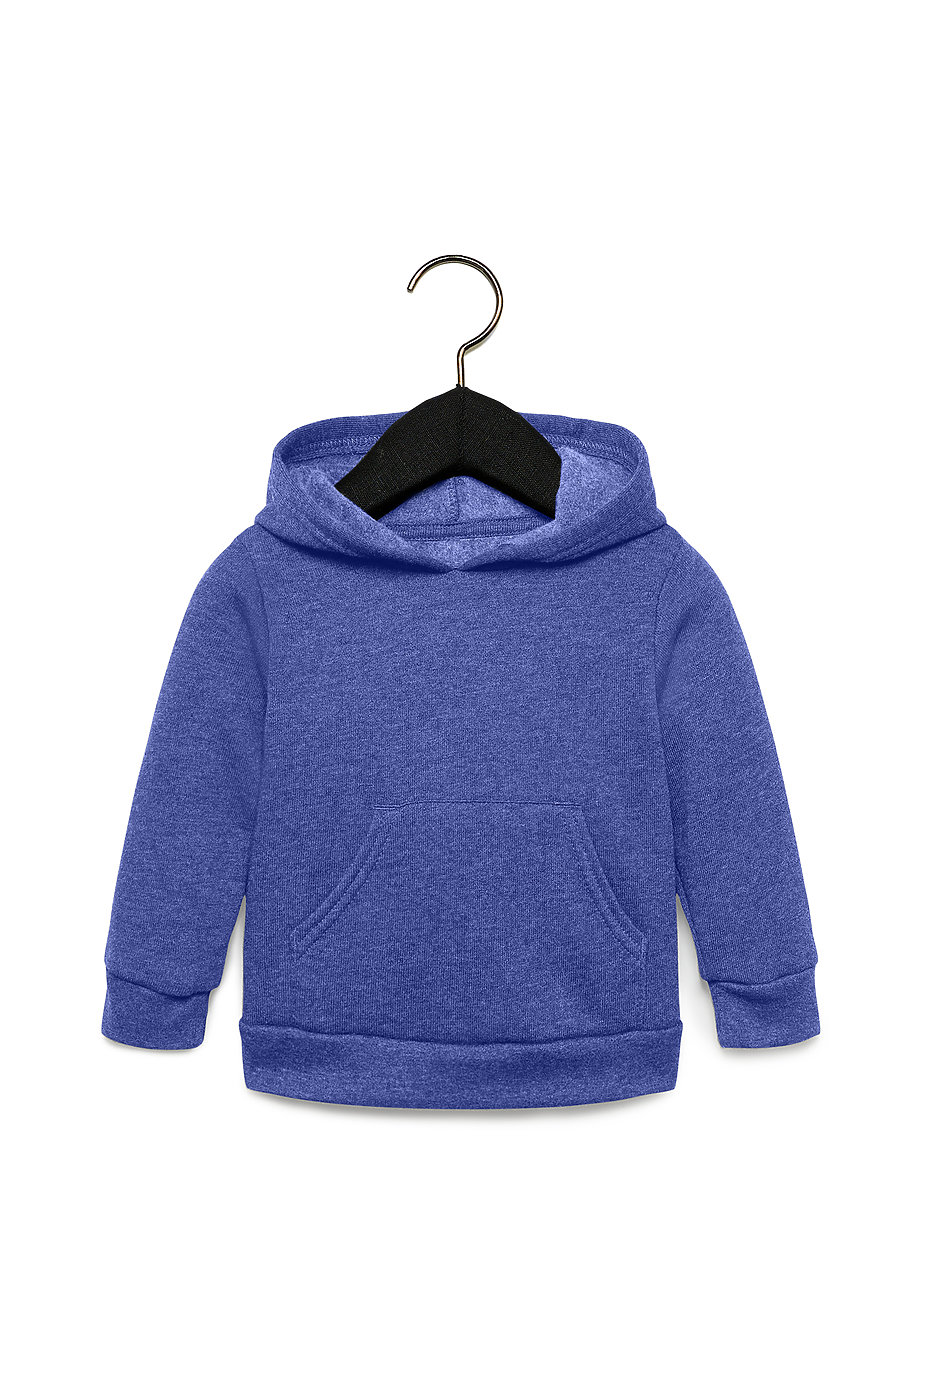 Light Blue Cotton Hoodie by Kids Wholesale Clothing